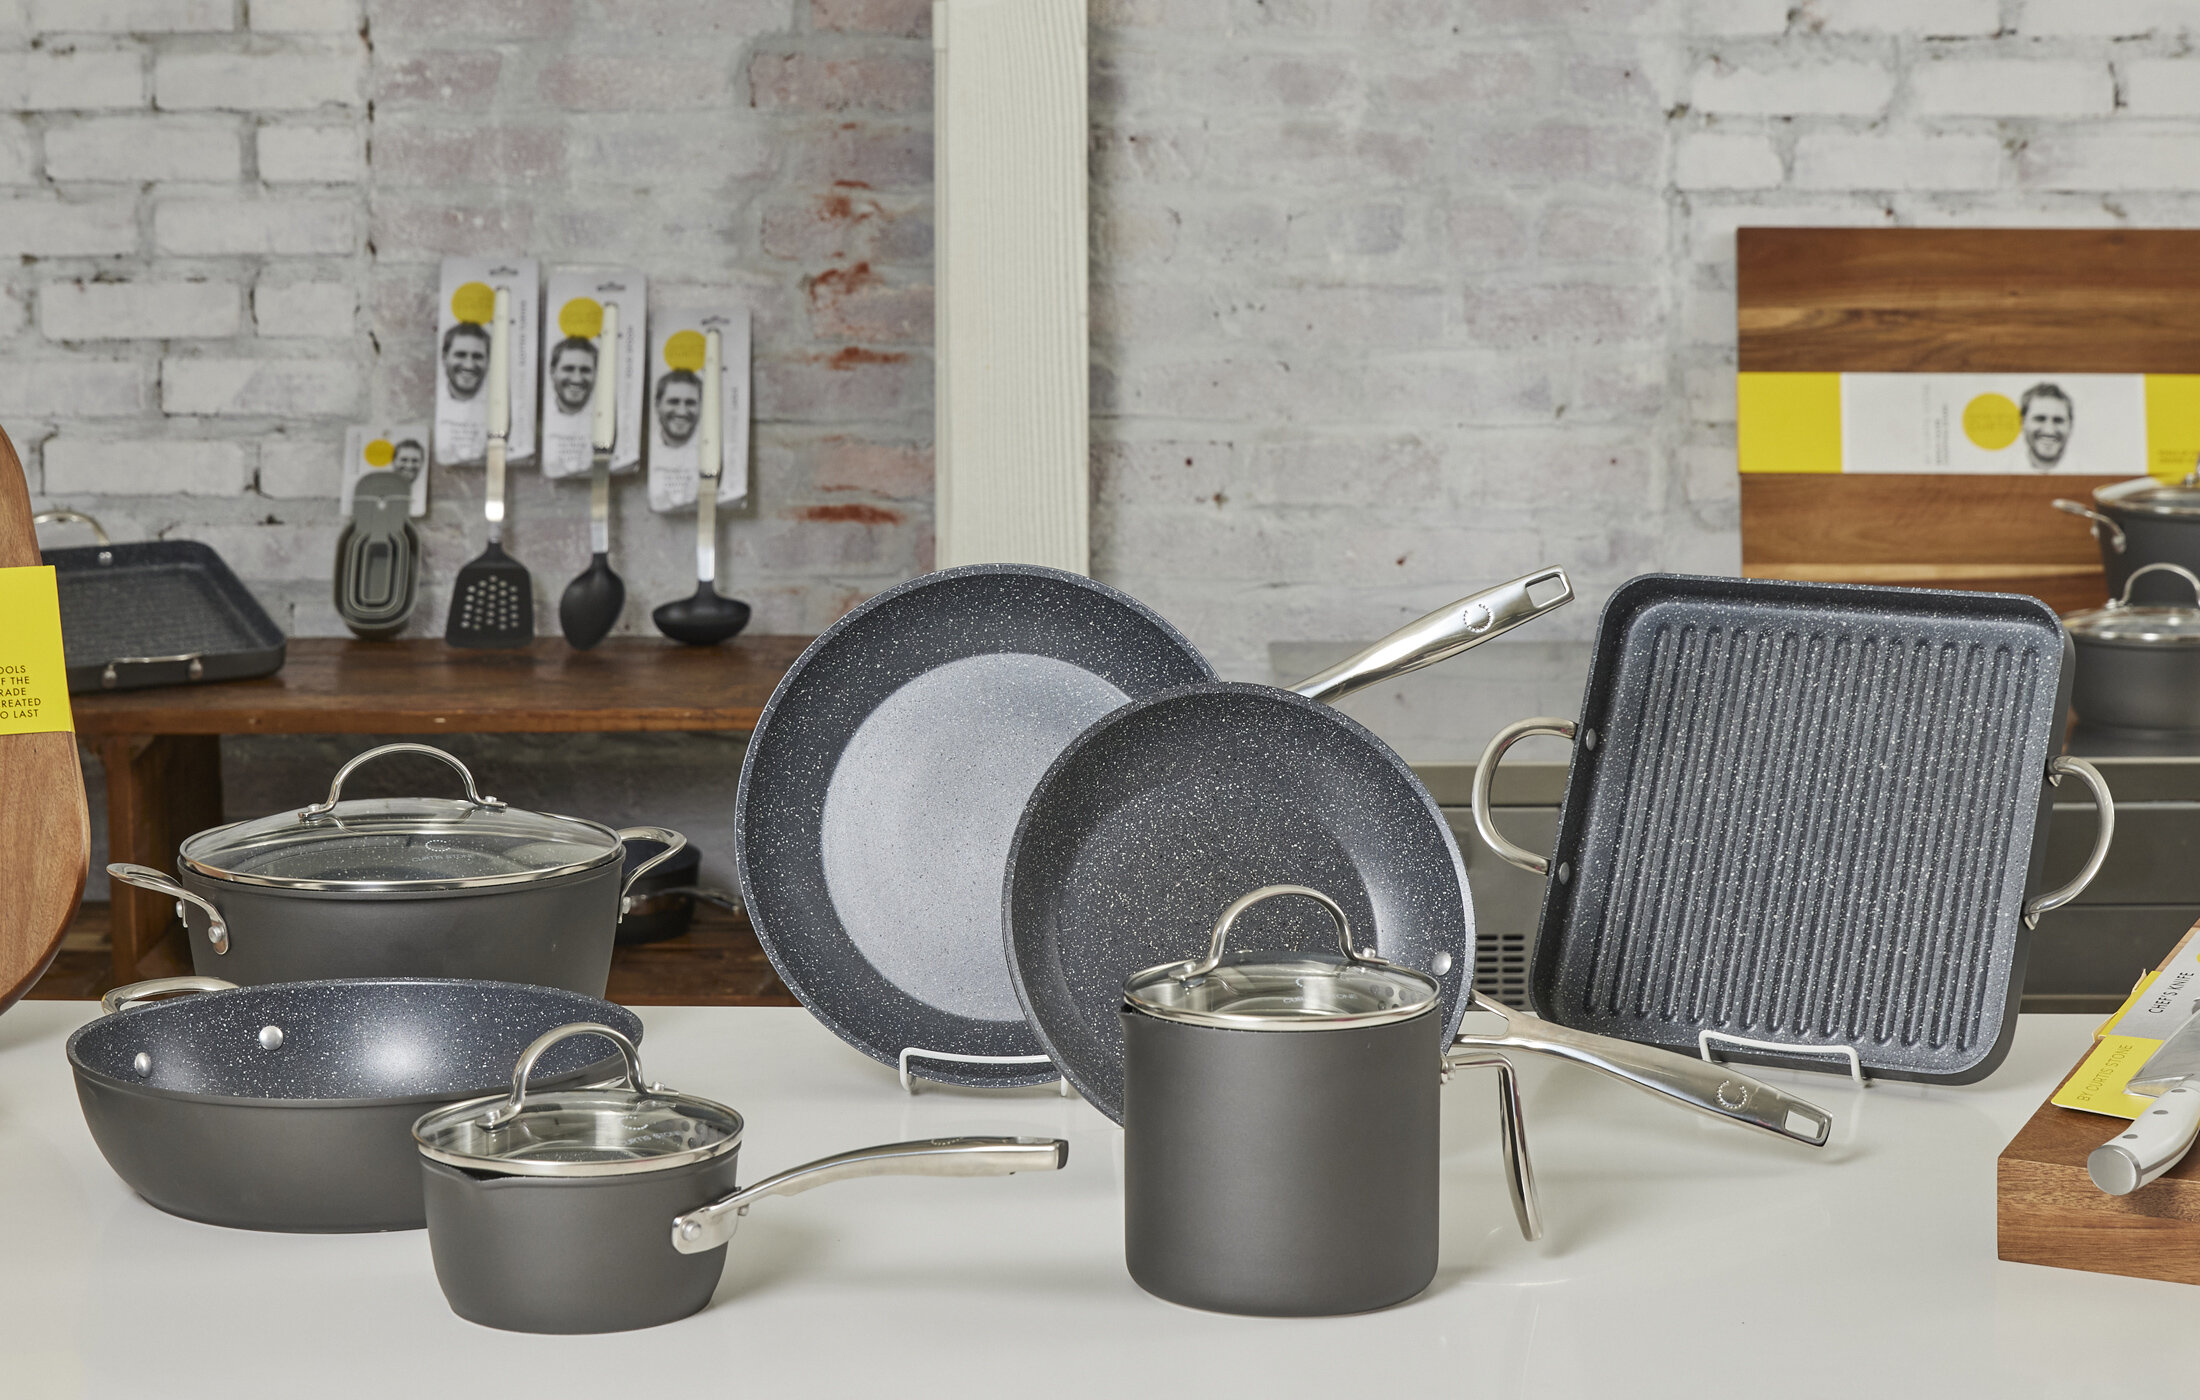 Curtis Stone Everyday Dura-Pan cookware set in